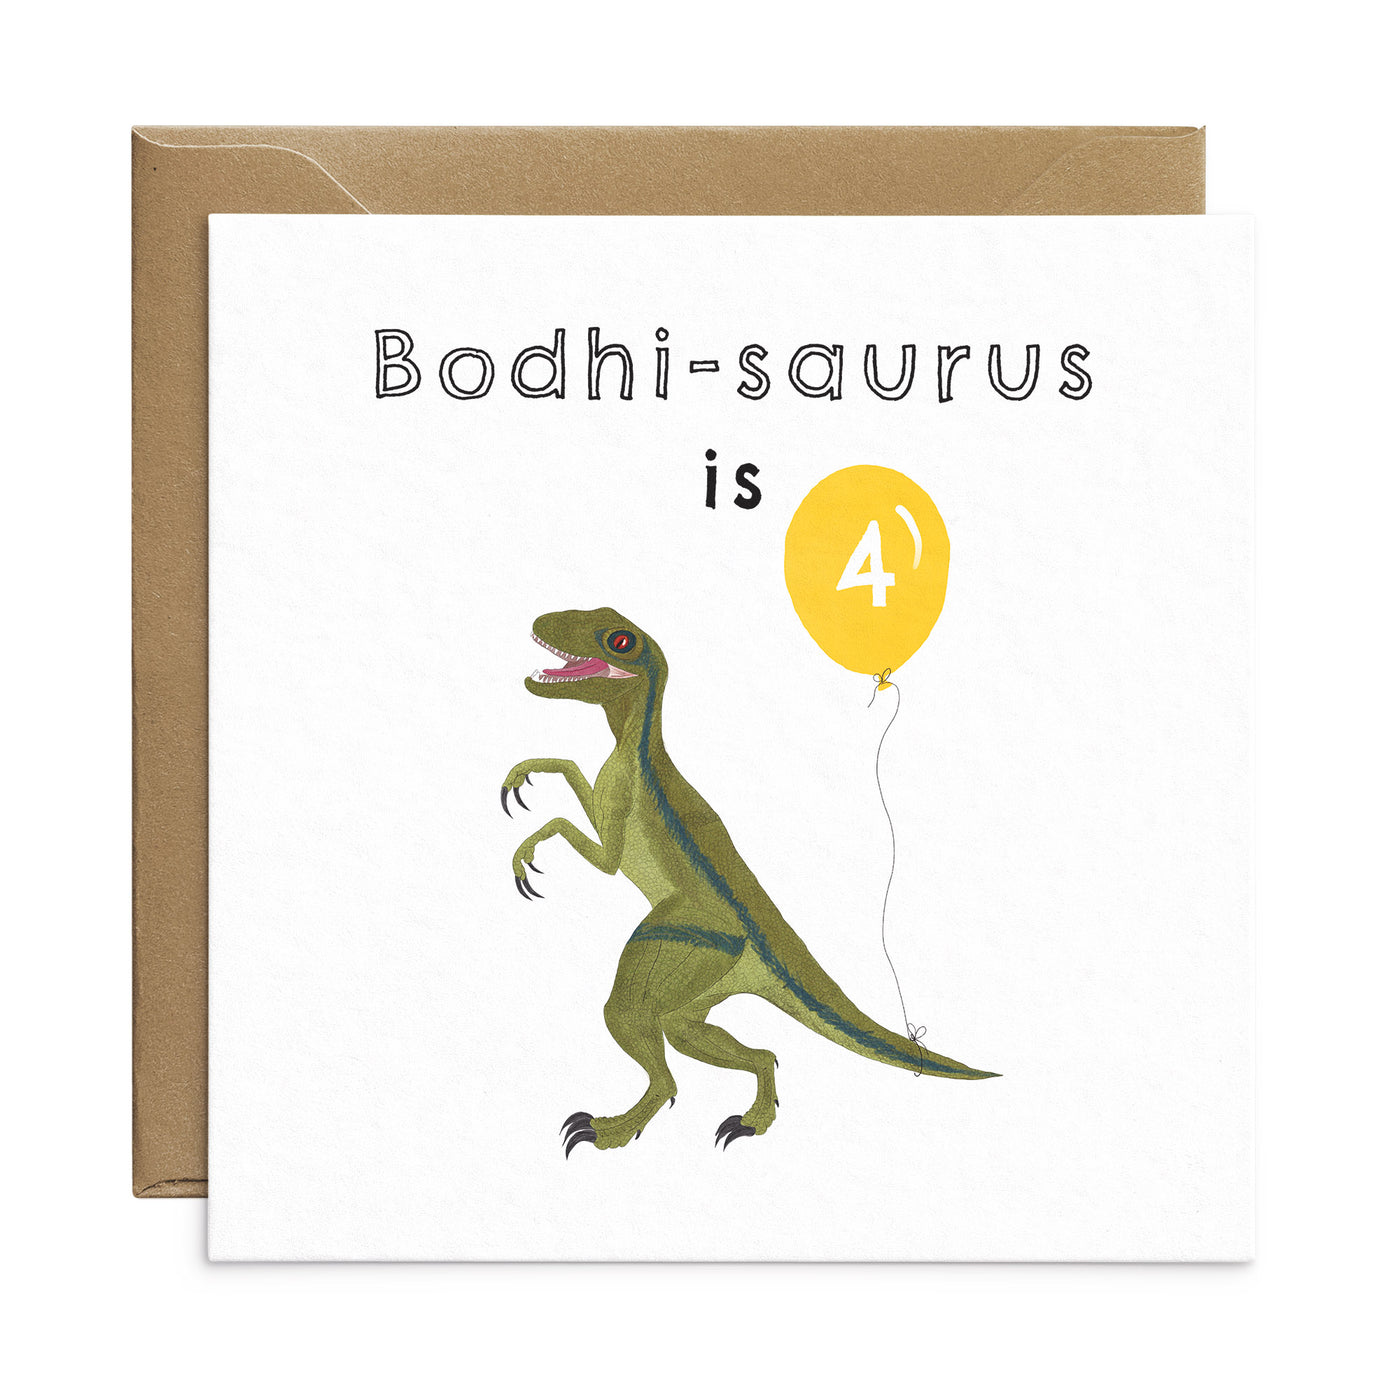 Dinosaur birthday card with unique illustration of a velociraptor holding a yellow balloon. Personalised text reads 'Bodhi-saurus is' with the number '3' on the balloon. Square card with brown Kraft envelope. Kids Birthday Card by Poppins and co.